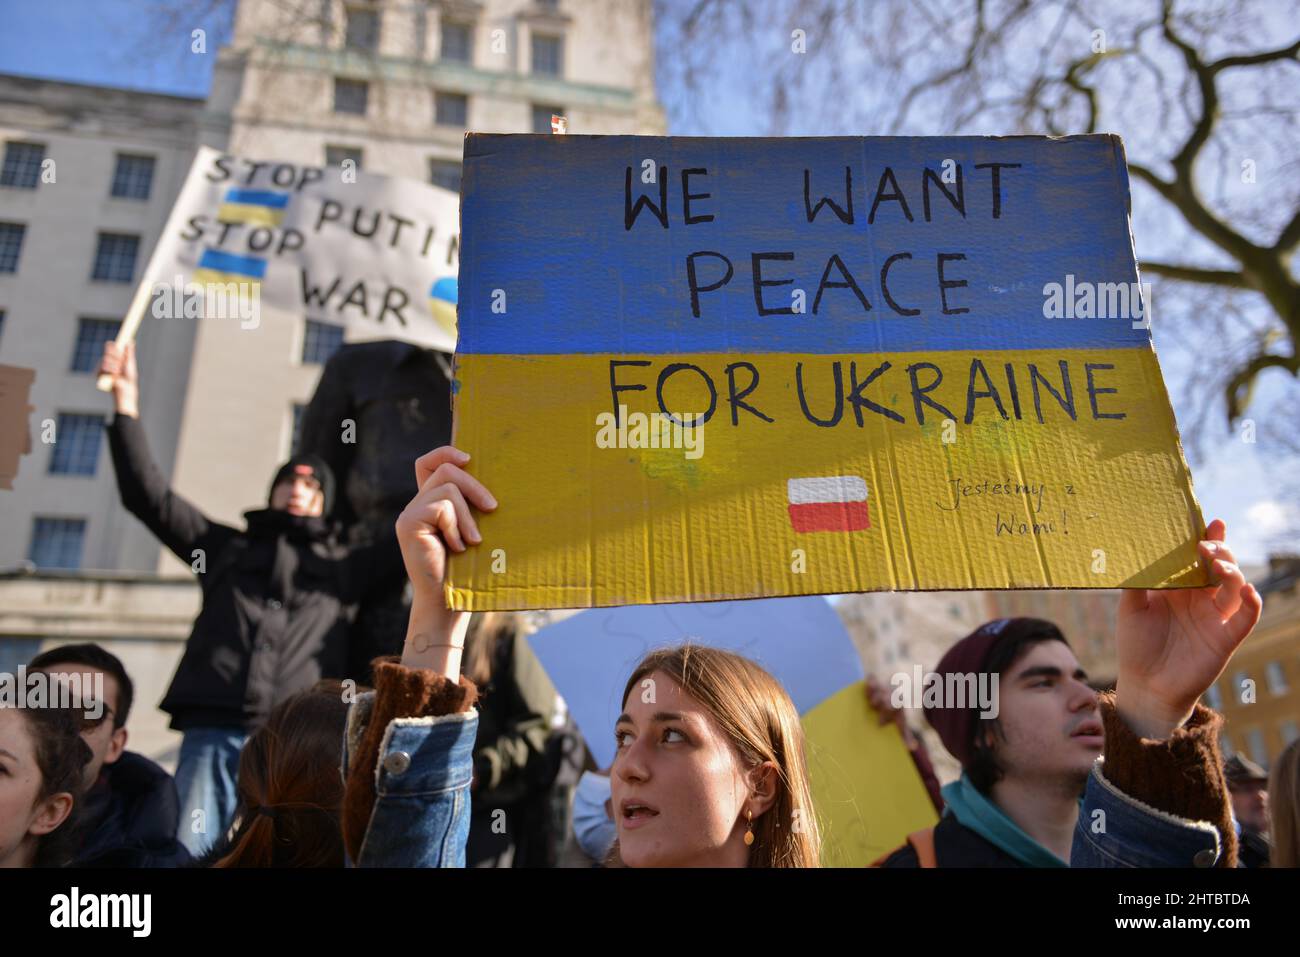 Ukrainians living in London and anti-war protesters, demonstrated opposite Downing Street against Russian invasion of Ukraine. Stock Photo